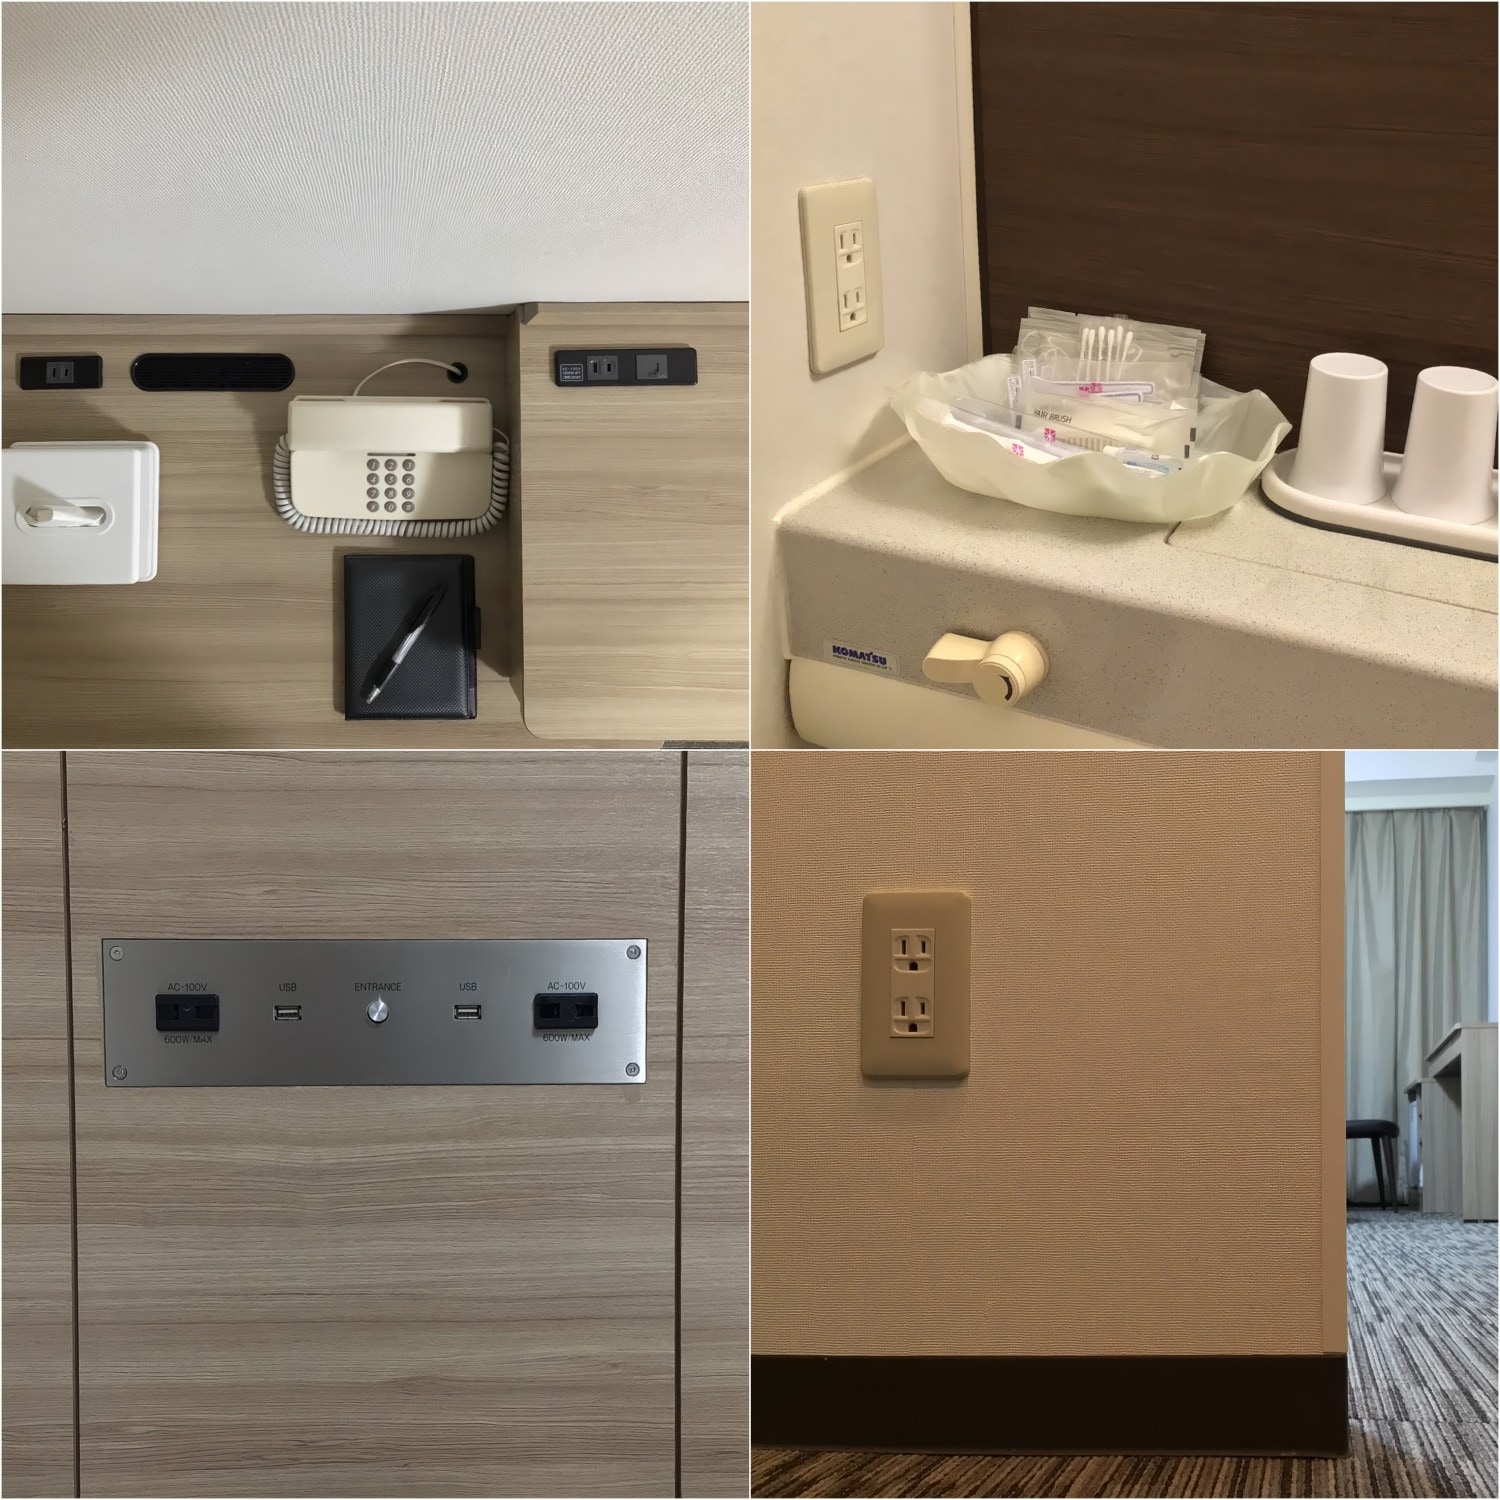 Many outlets in the room